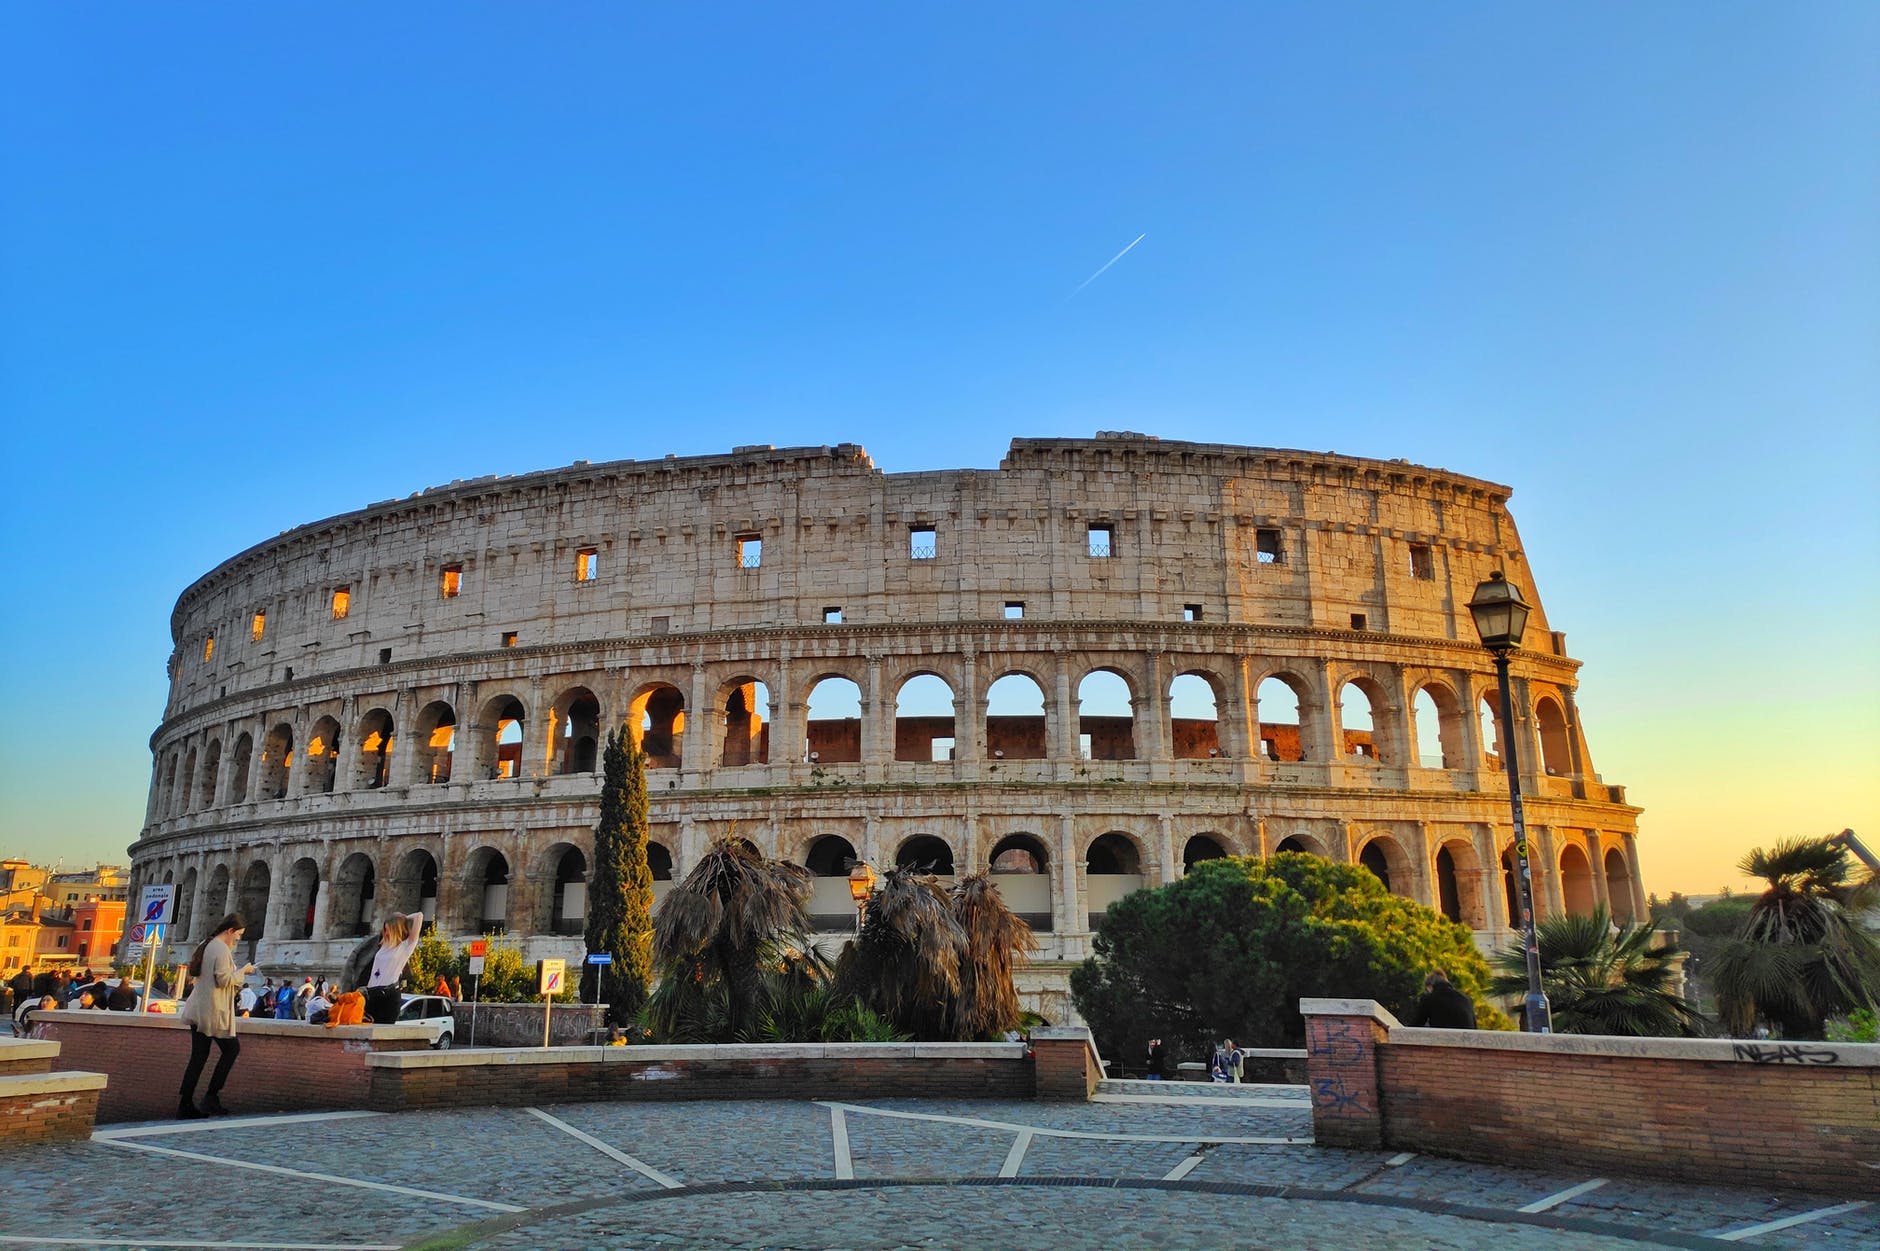 7 Wonders of the World: The Roman Colosseum